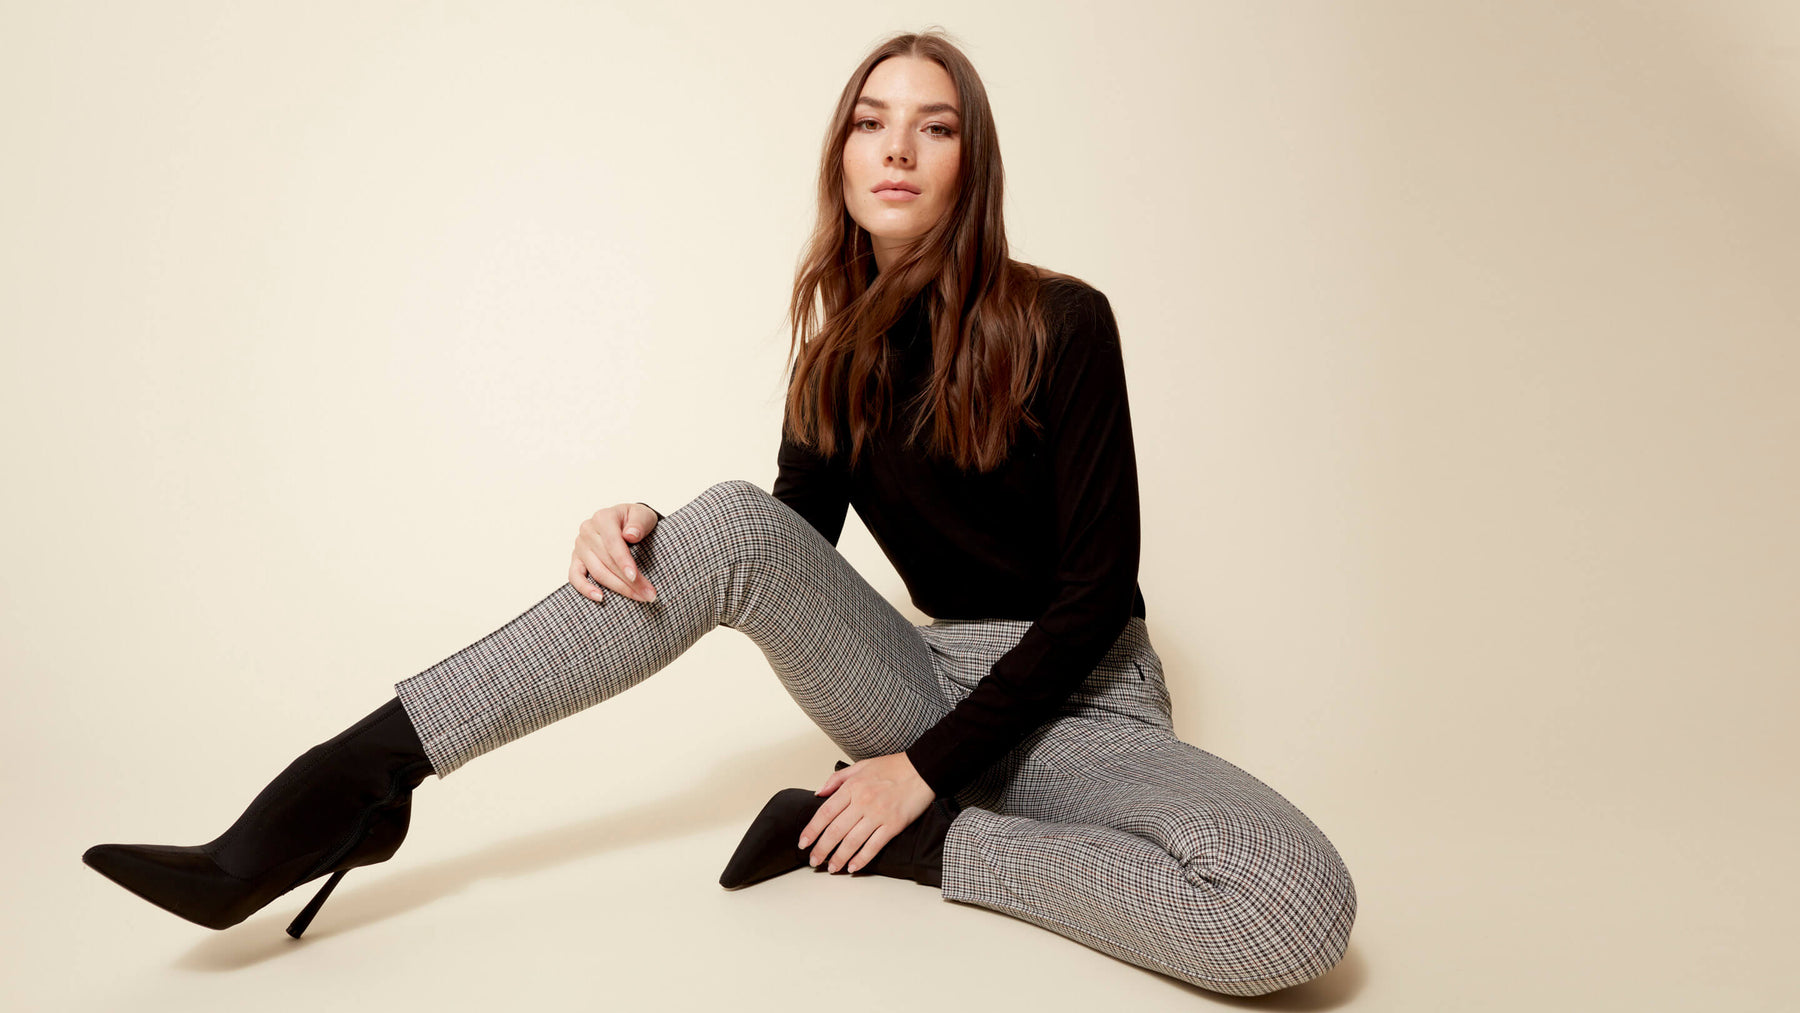 Women's Workwear Editorial - Cinnamon Smooth Stretch Plaid Pull-On Pants - Charlie B Collection Canada